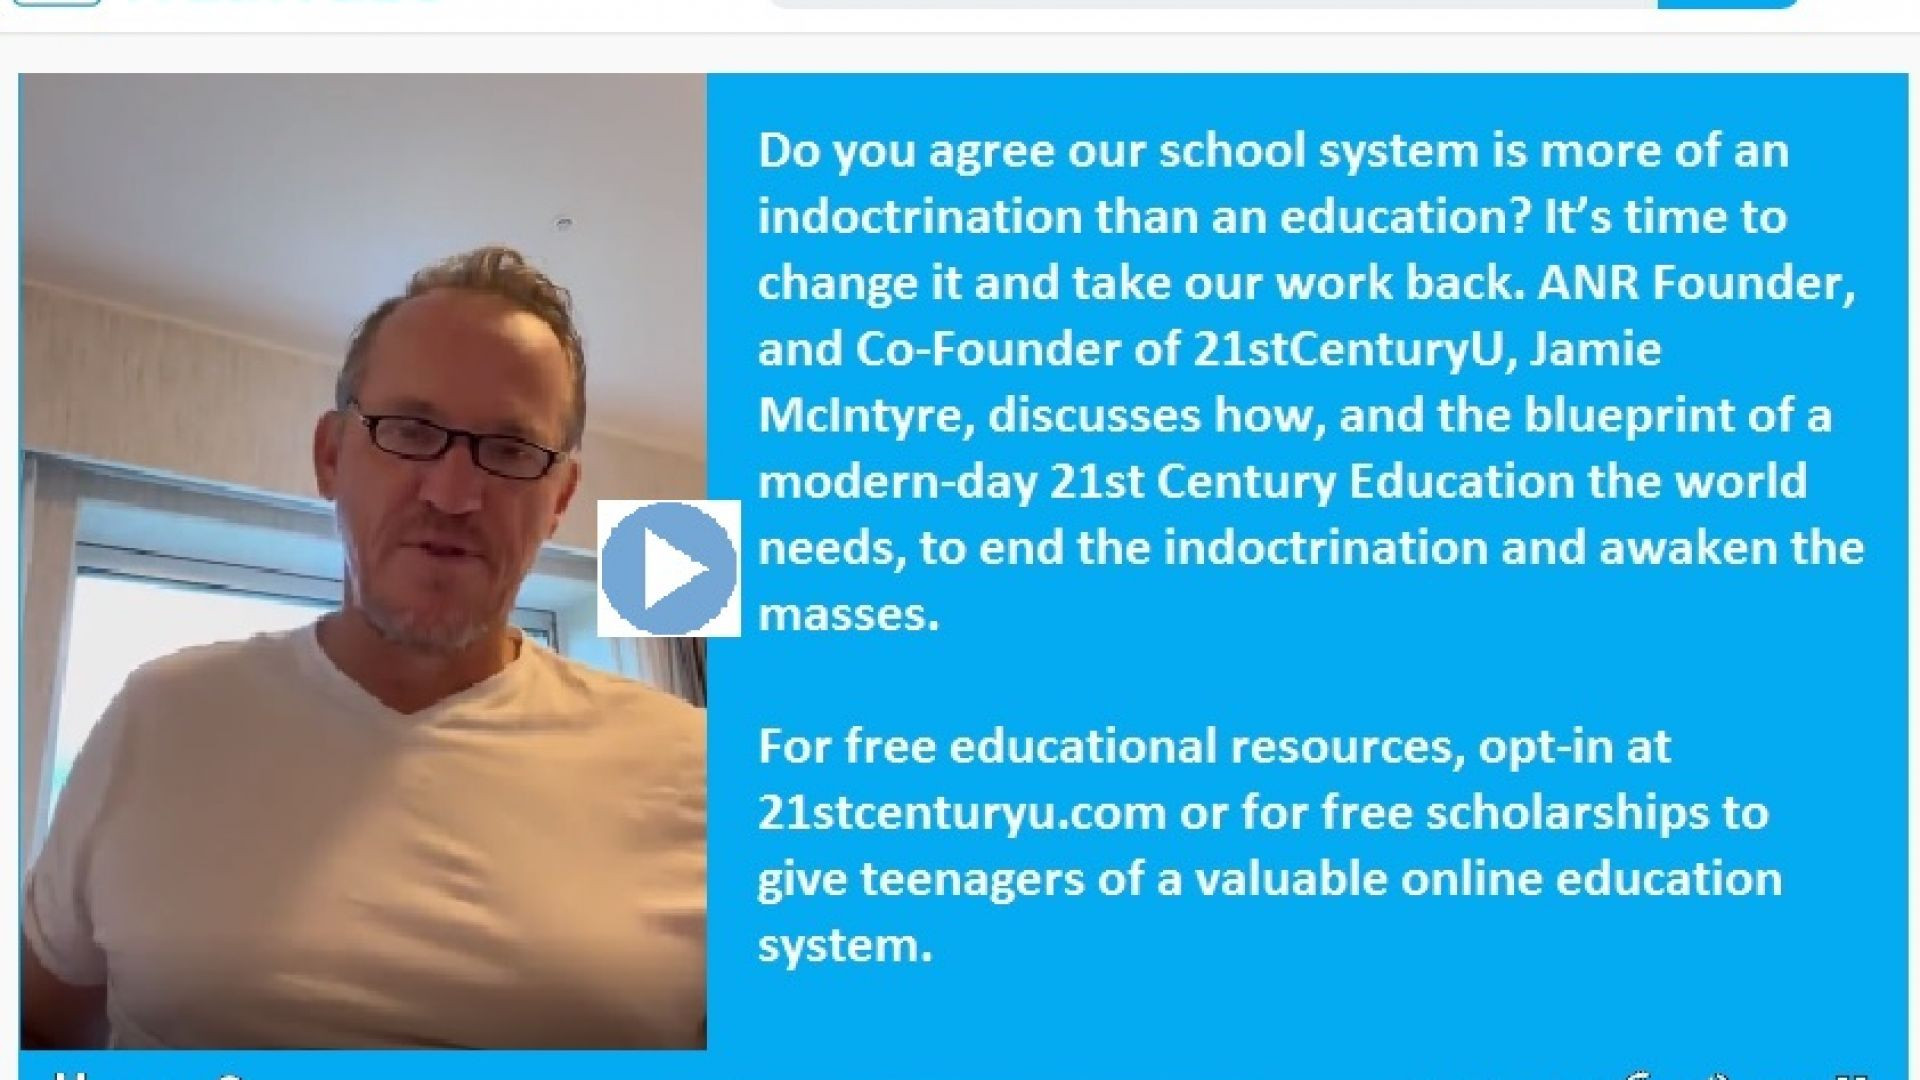 Do You Agree Our School System is More of An Indoctrination Than an Education?